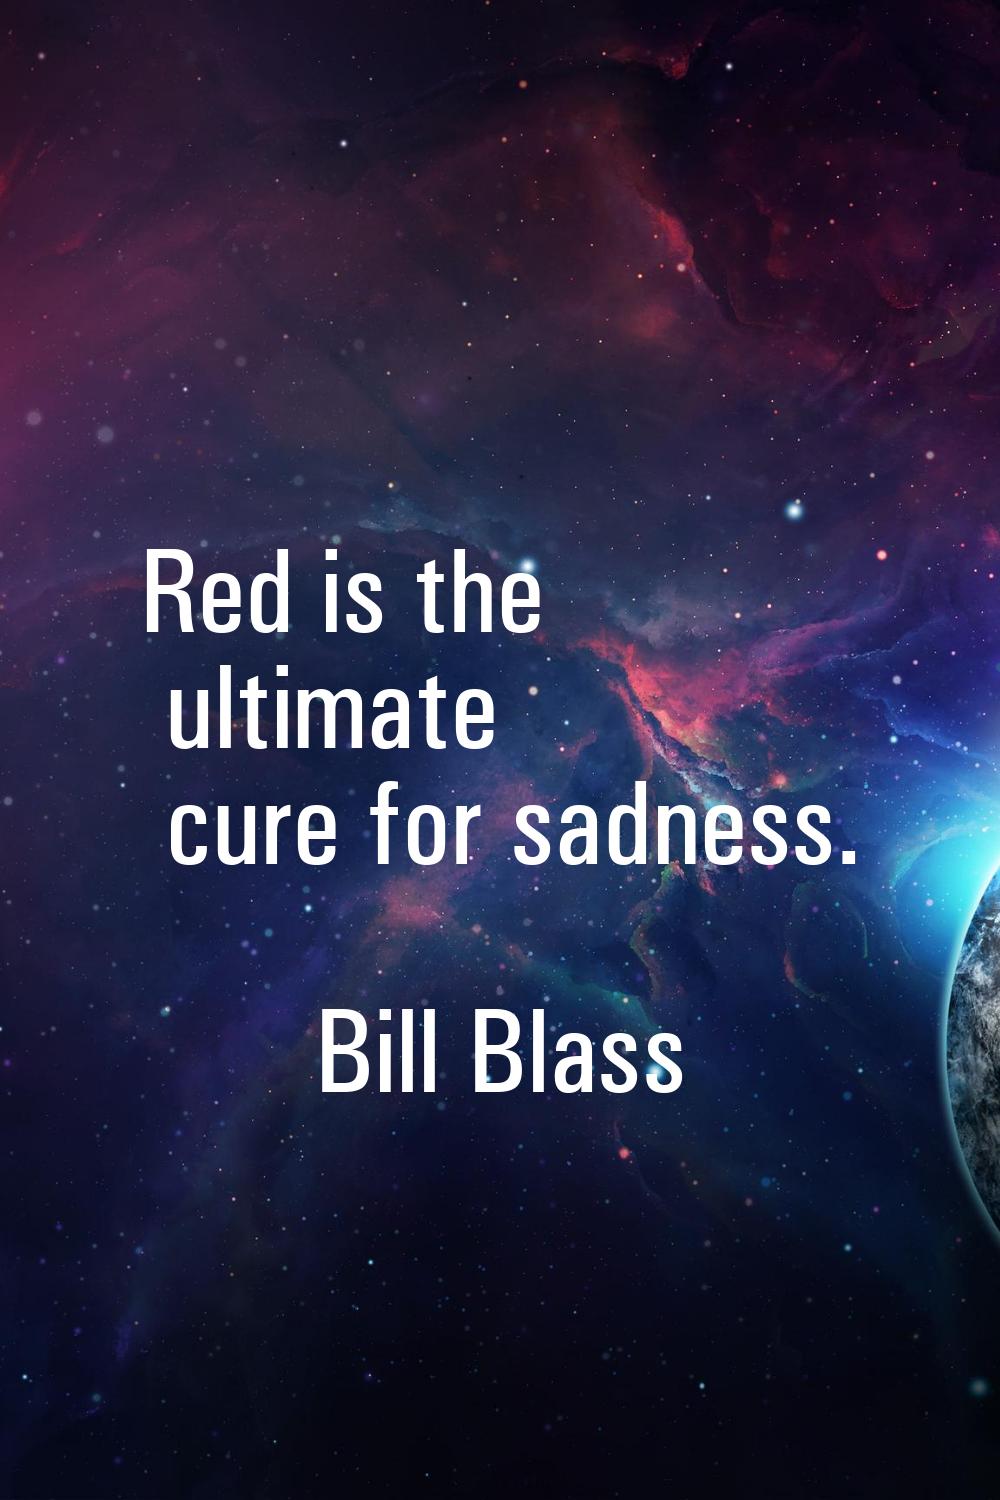 Red is the ultimate cure for sadness.